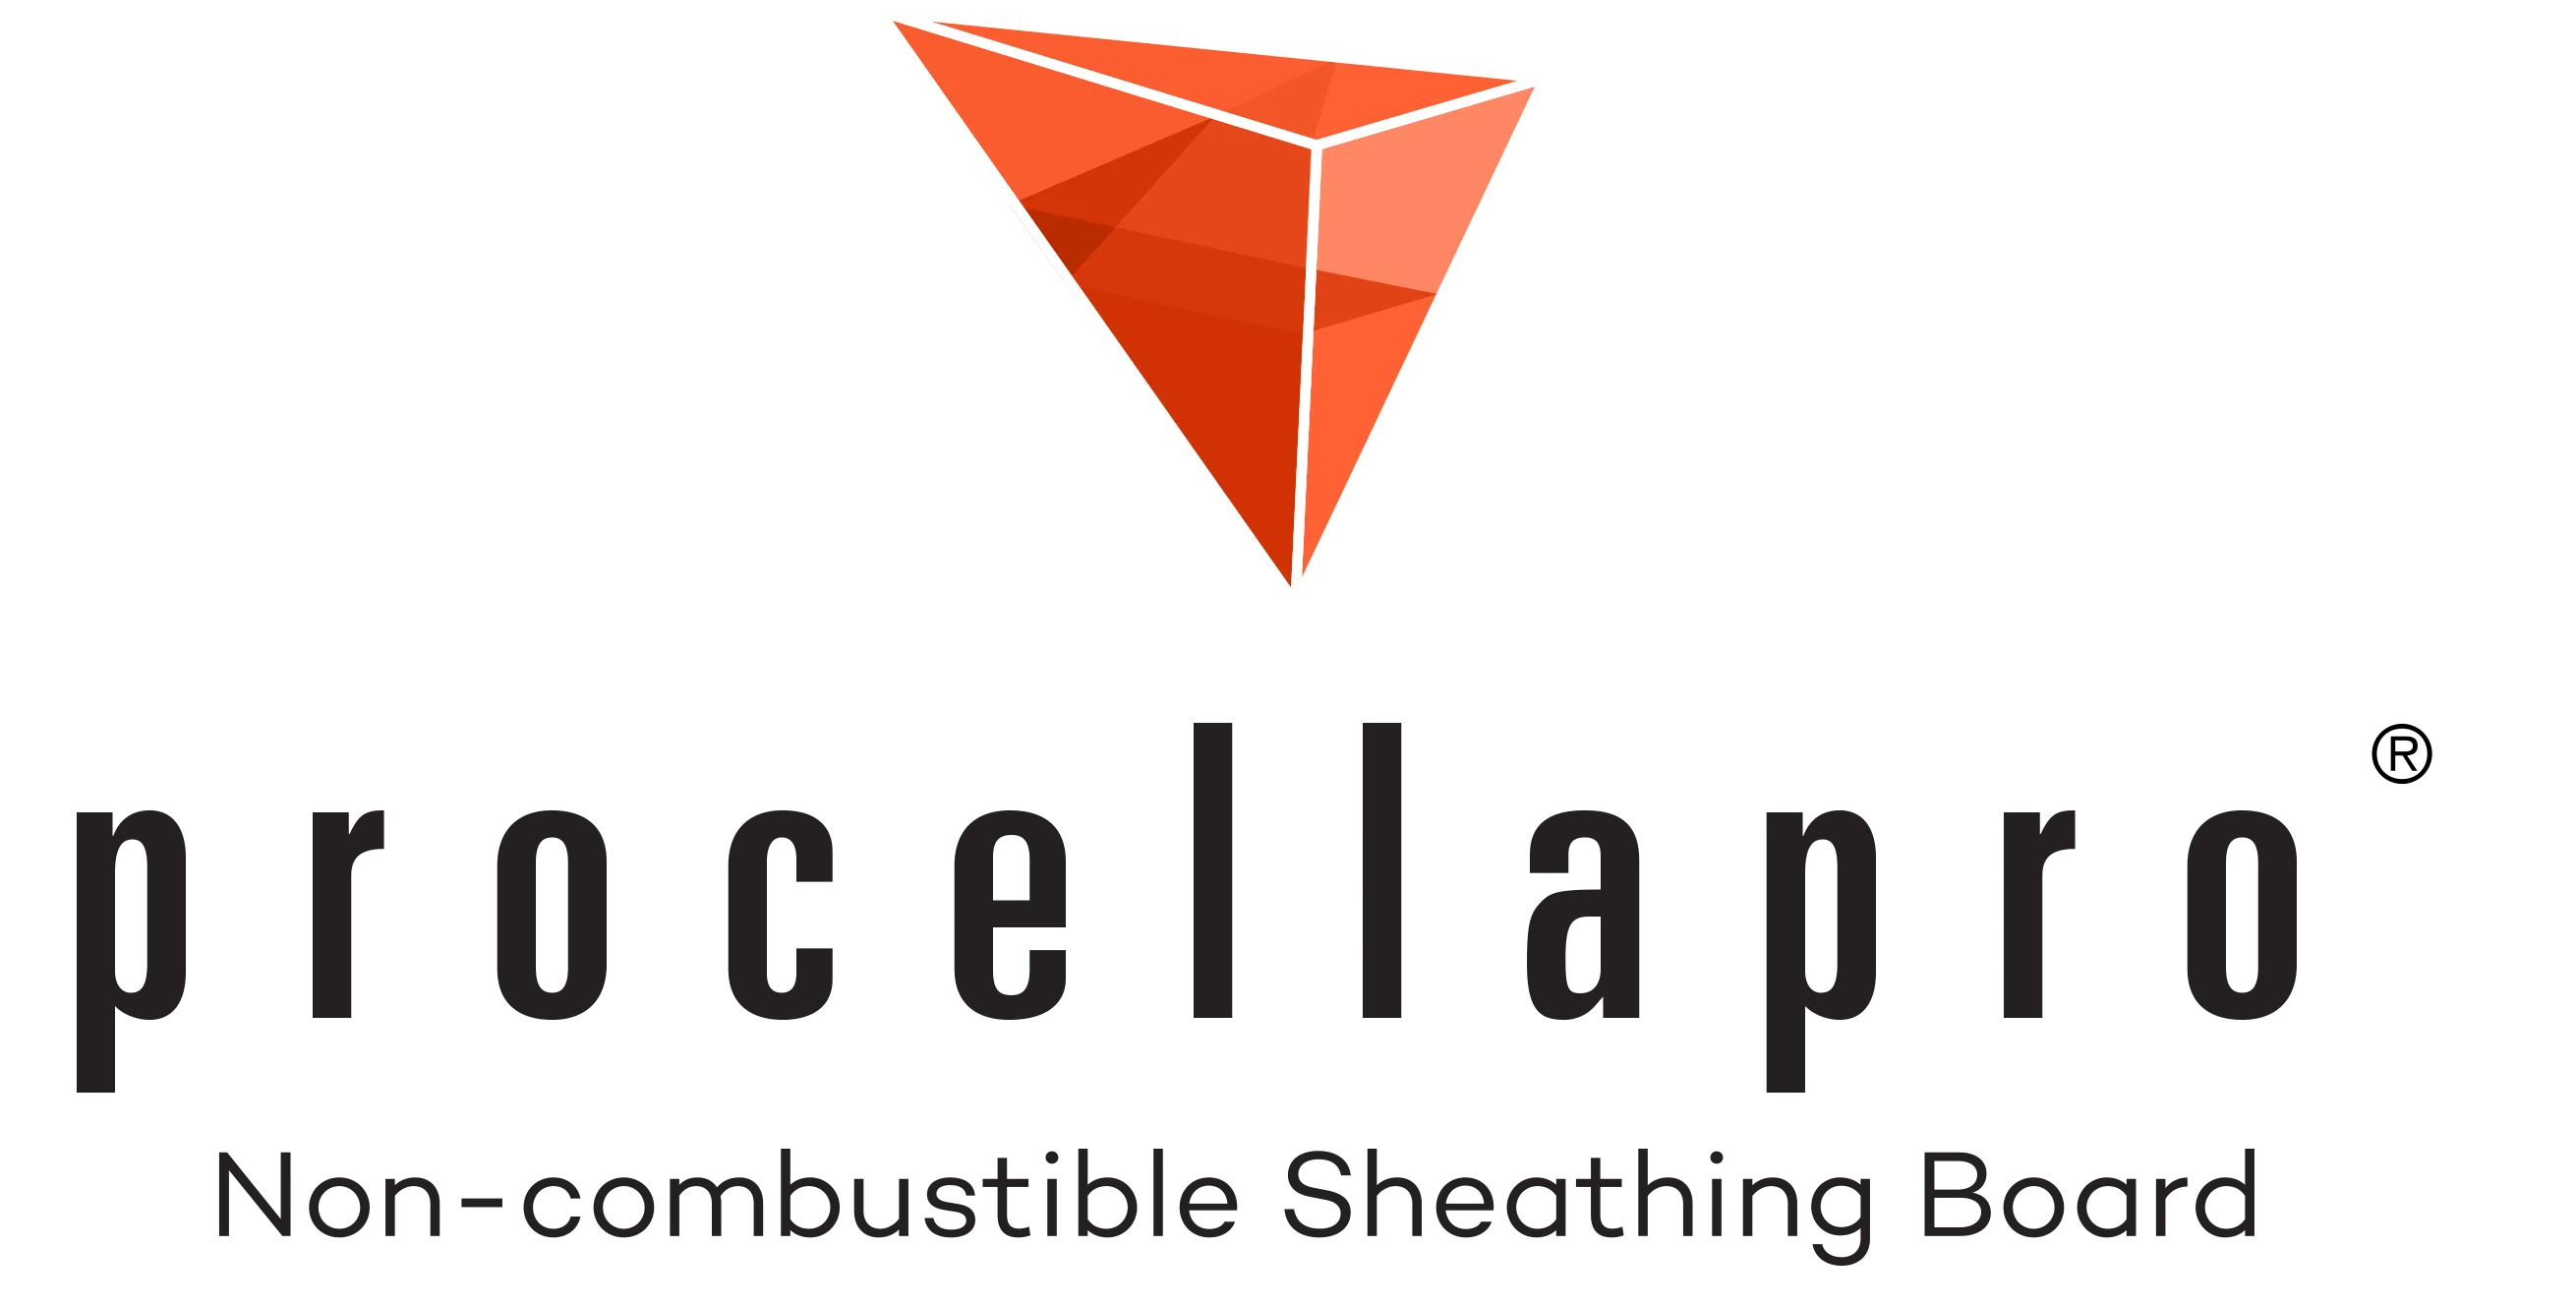 ProcellaPro Non-Combustible Sheathing Board